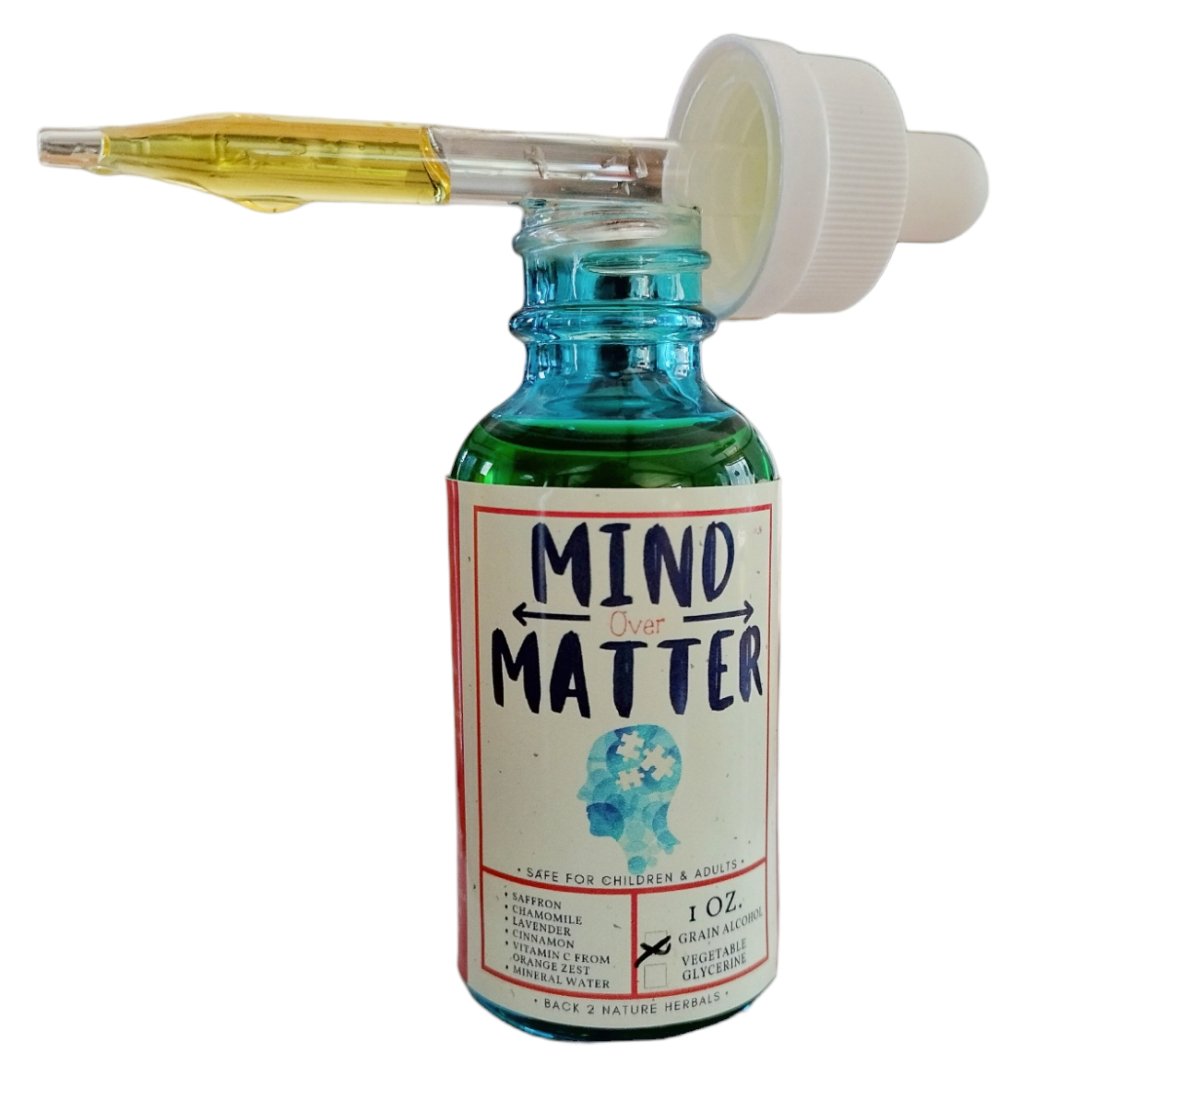 Organic Mind over Matter Saffron extract - Back 2 Nature Herbals